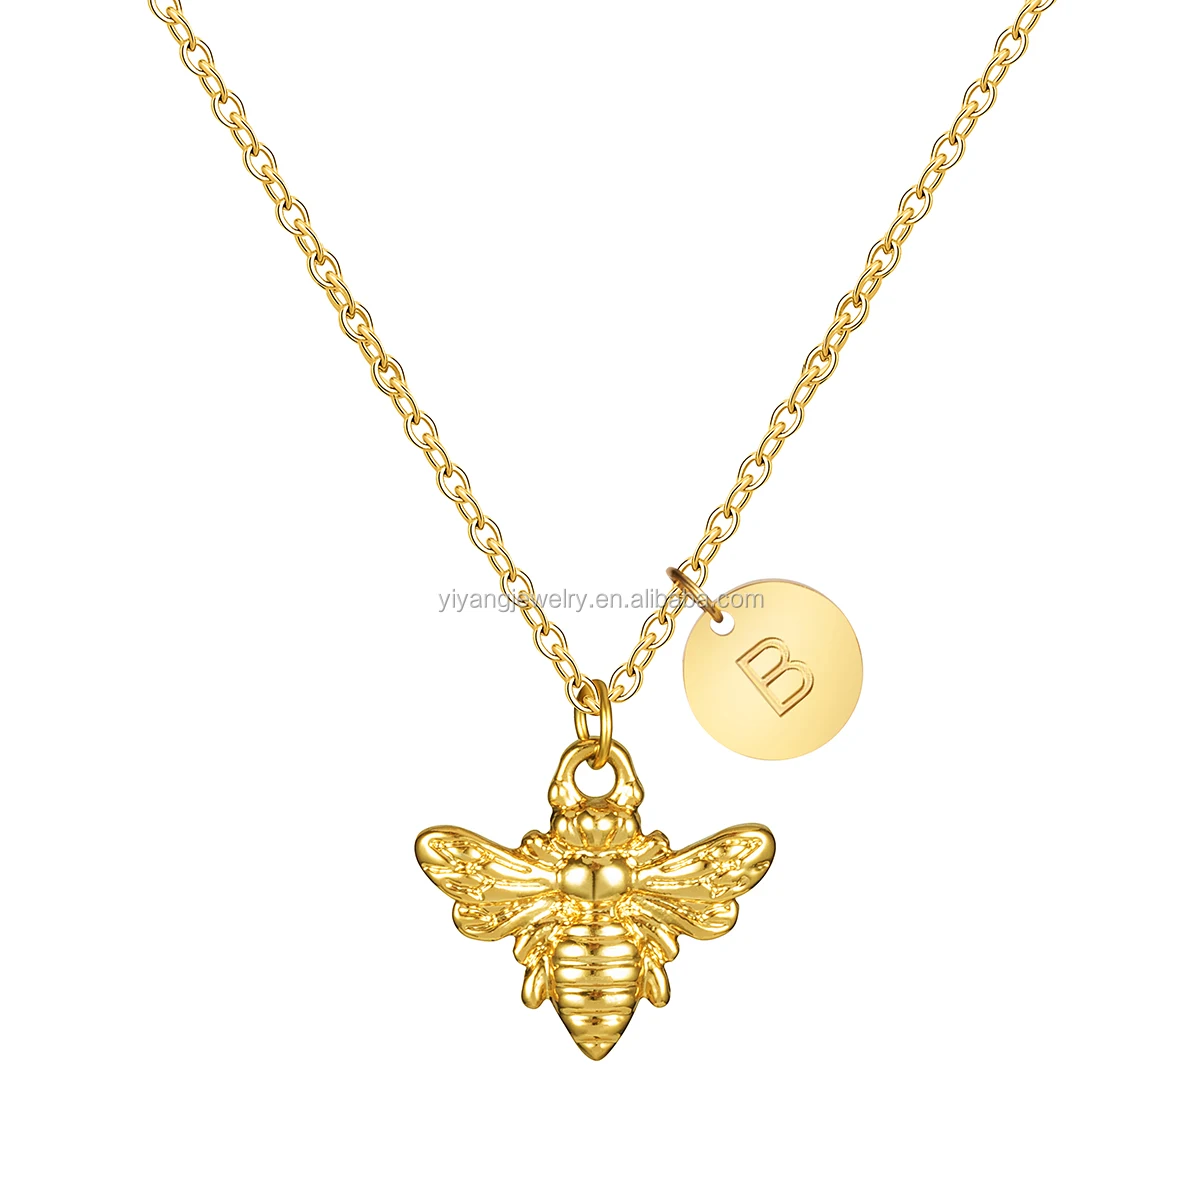 New Design Bee Happy 18k Gold Plated Bee Pendant Name Necklace Buy Gold Bee Necklace Gold Chain Necklace With Name 18k Gold Plated Necklace Product On Alibaba Com